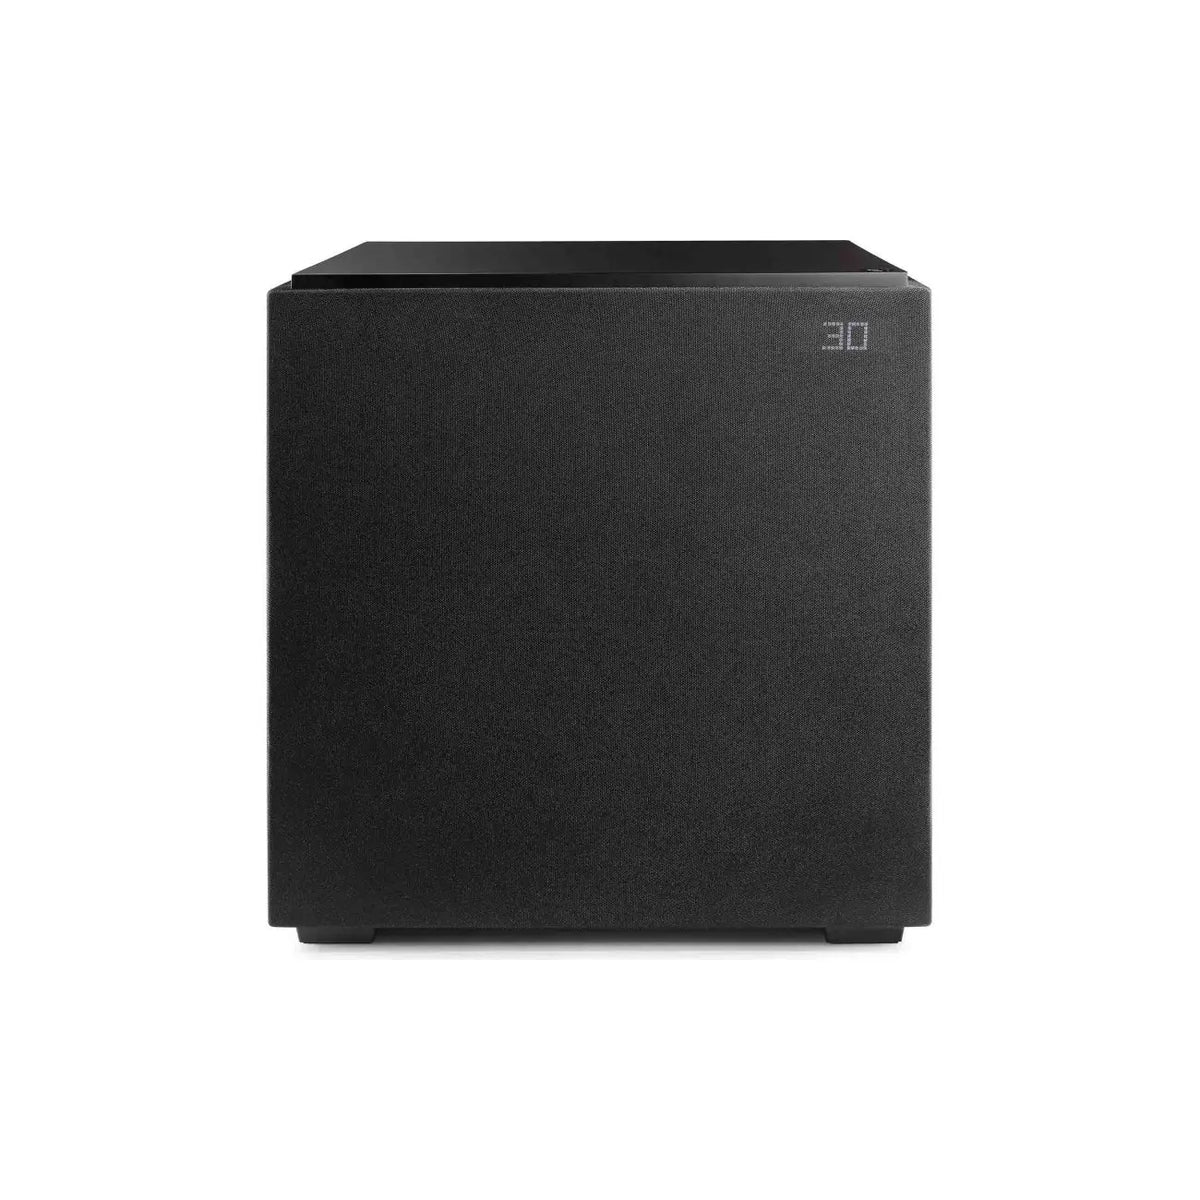 Definitive Technology - Descend Series DN12 12” Subwoofer - Masters Voice Audio Visual